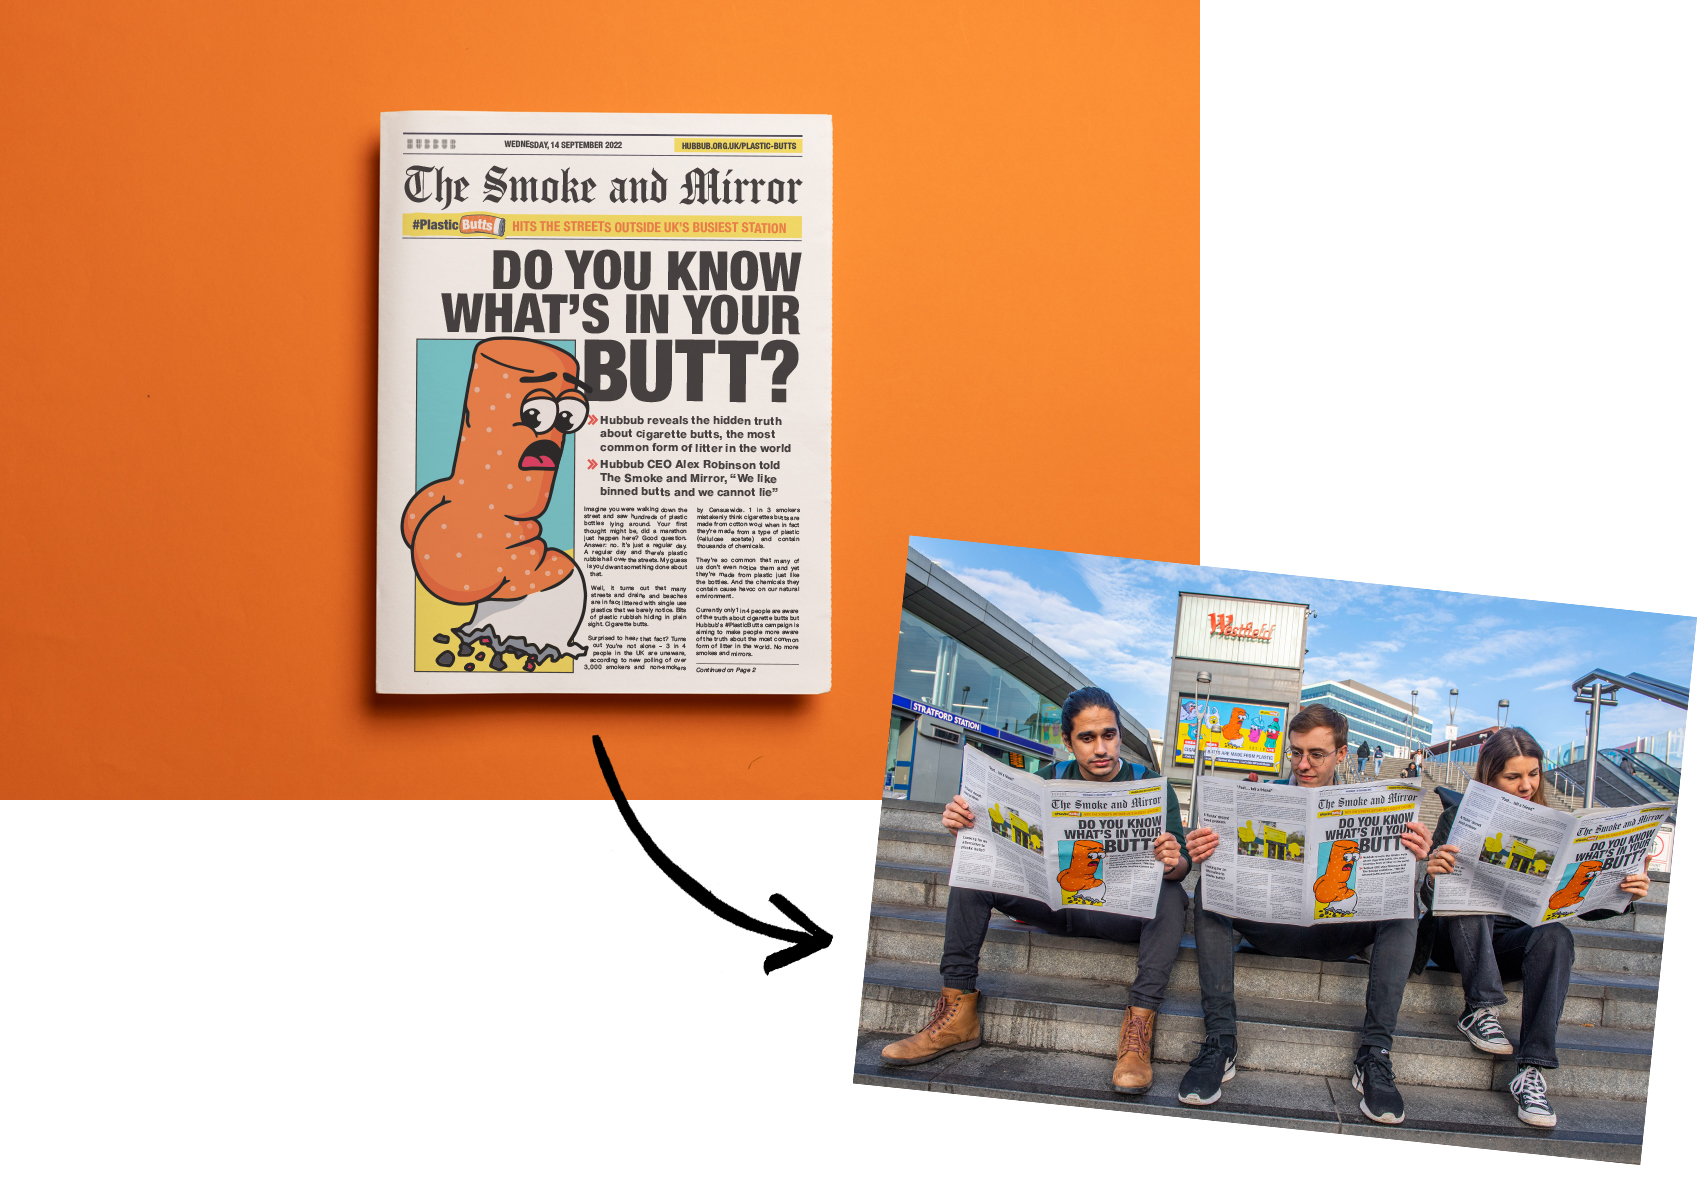 Tabloid newspaper for Hubbub #Plasticbutts campaign. Printed by Newspaper Club. 